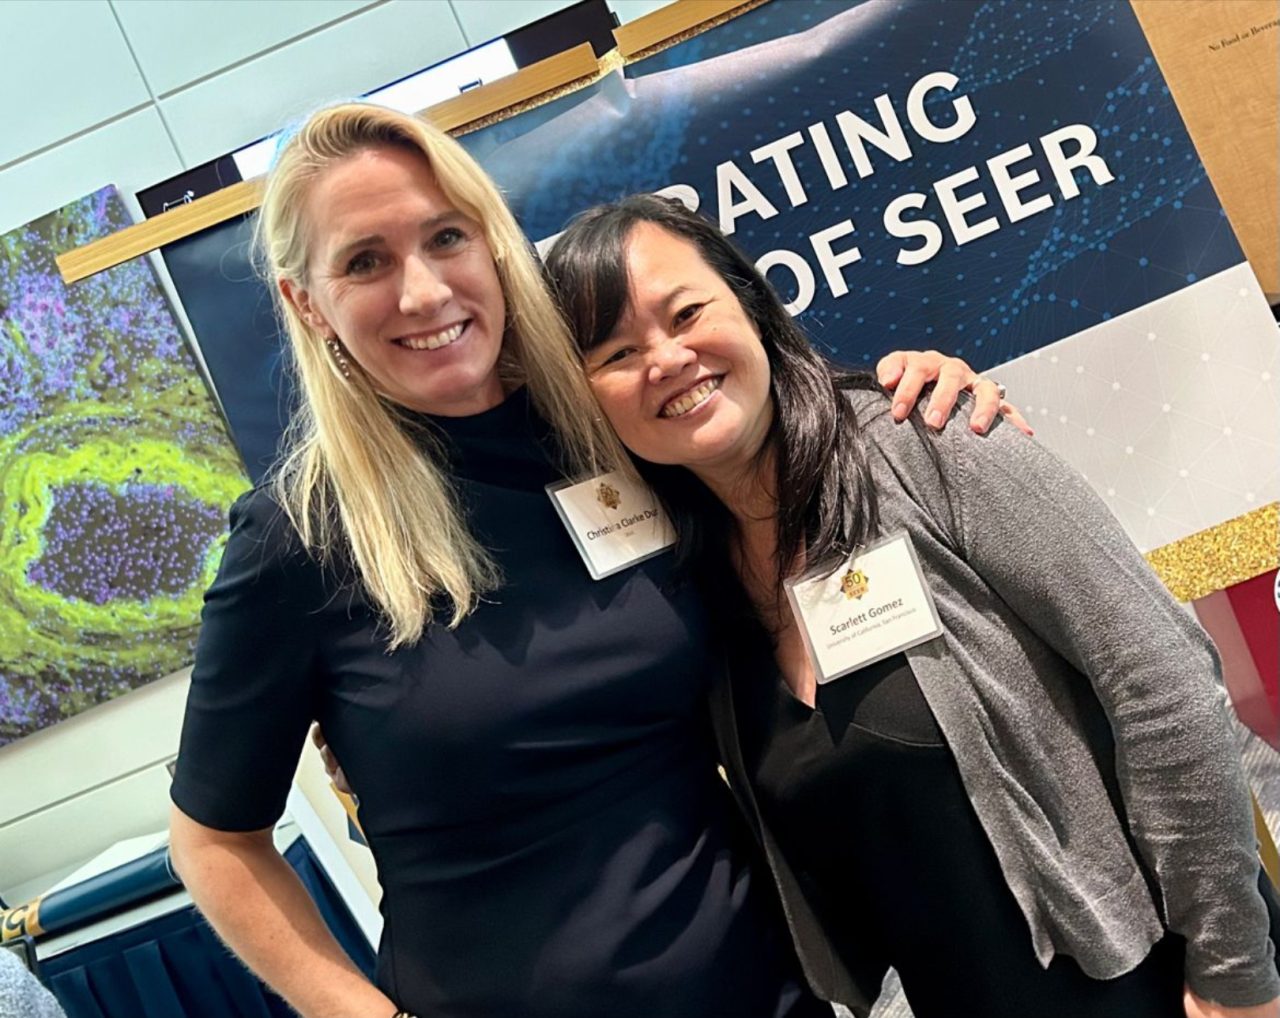 Christina Clarke Dur: Had the BEST day in Bethesda with colleagues celebrating the 50th anniversary of the National Cancer Institute (NCI) Surveillance, Epidemiology, and End Results (SEER) program.